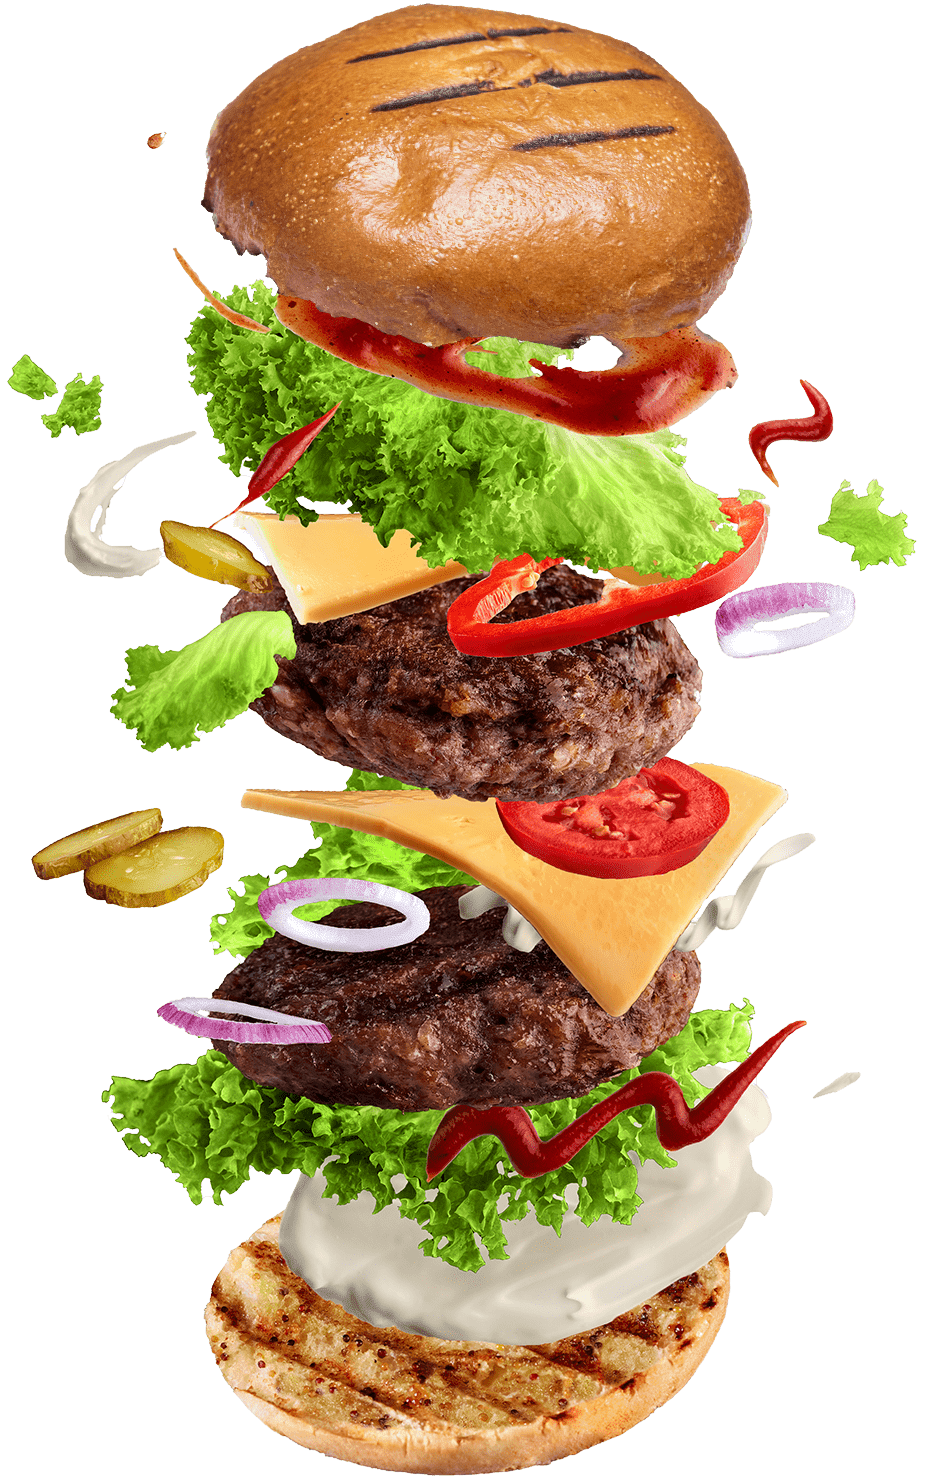 https://chicagogrill.co.uk/wp-content/uploads/2023/04/maxi-hamburger-double-cheeseburger-with-flying-ingredients-isolated-white-1.png